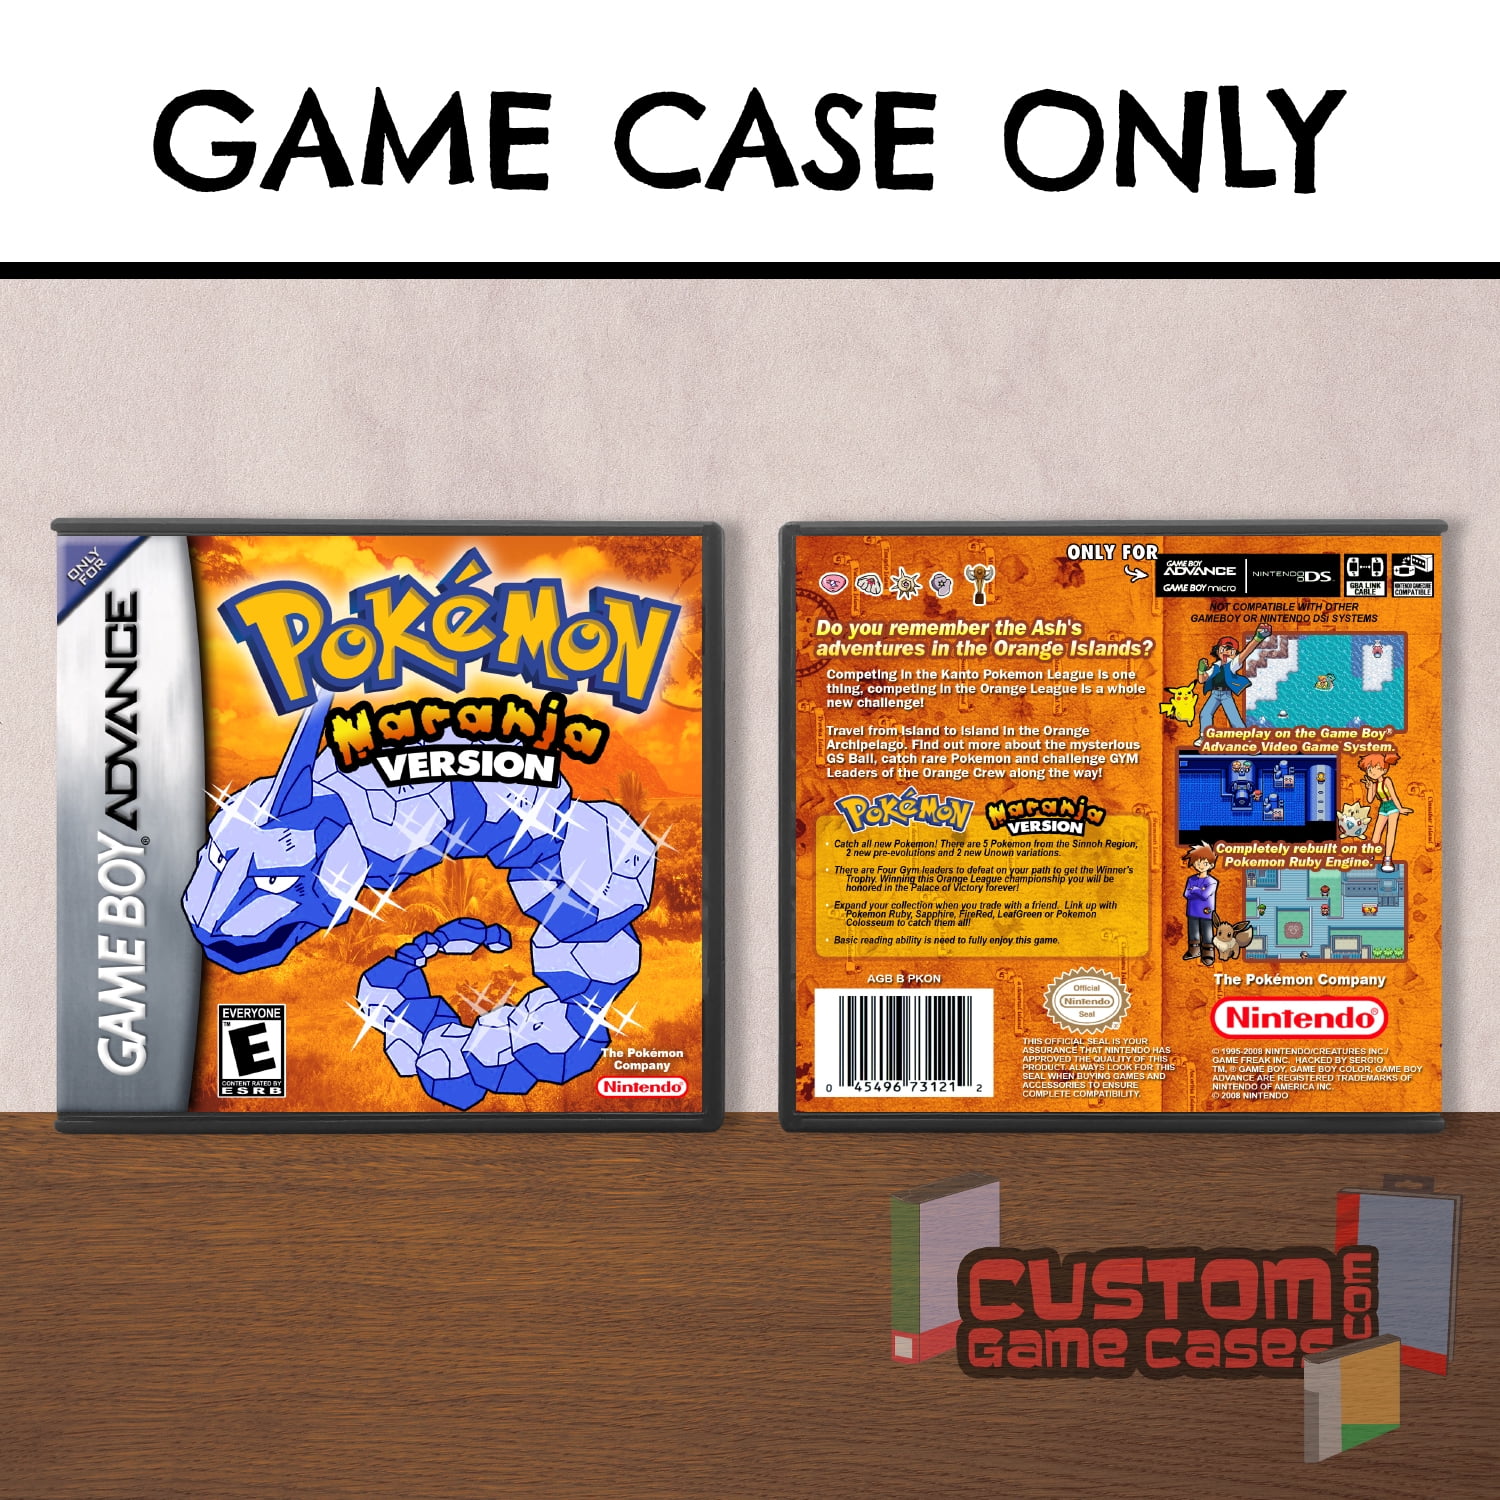 TVM Wantage - What's cooler than a Pokémon Gameboy game? A mint in